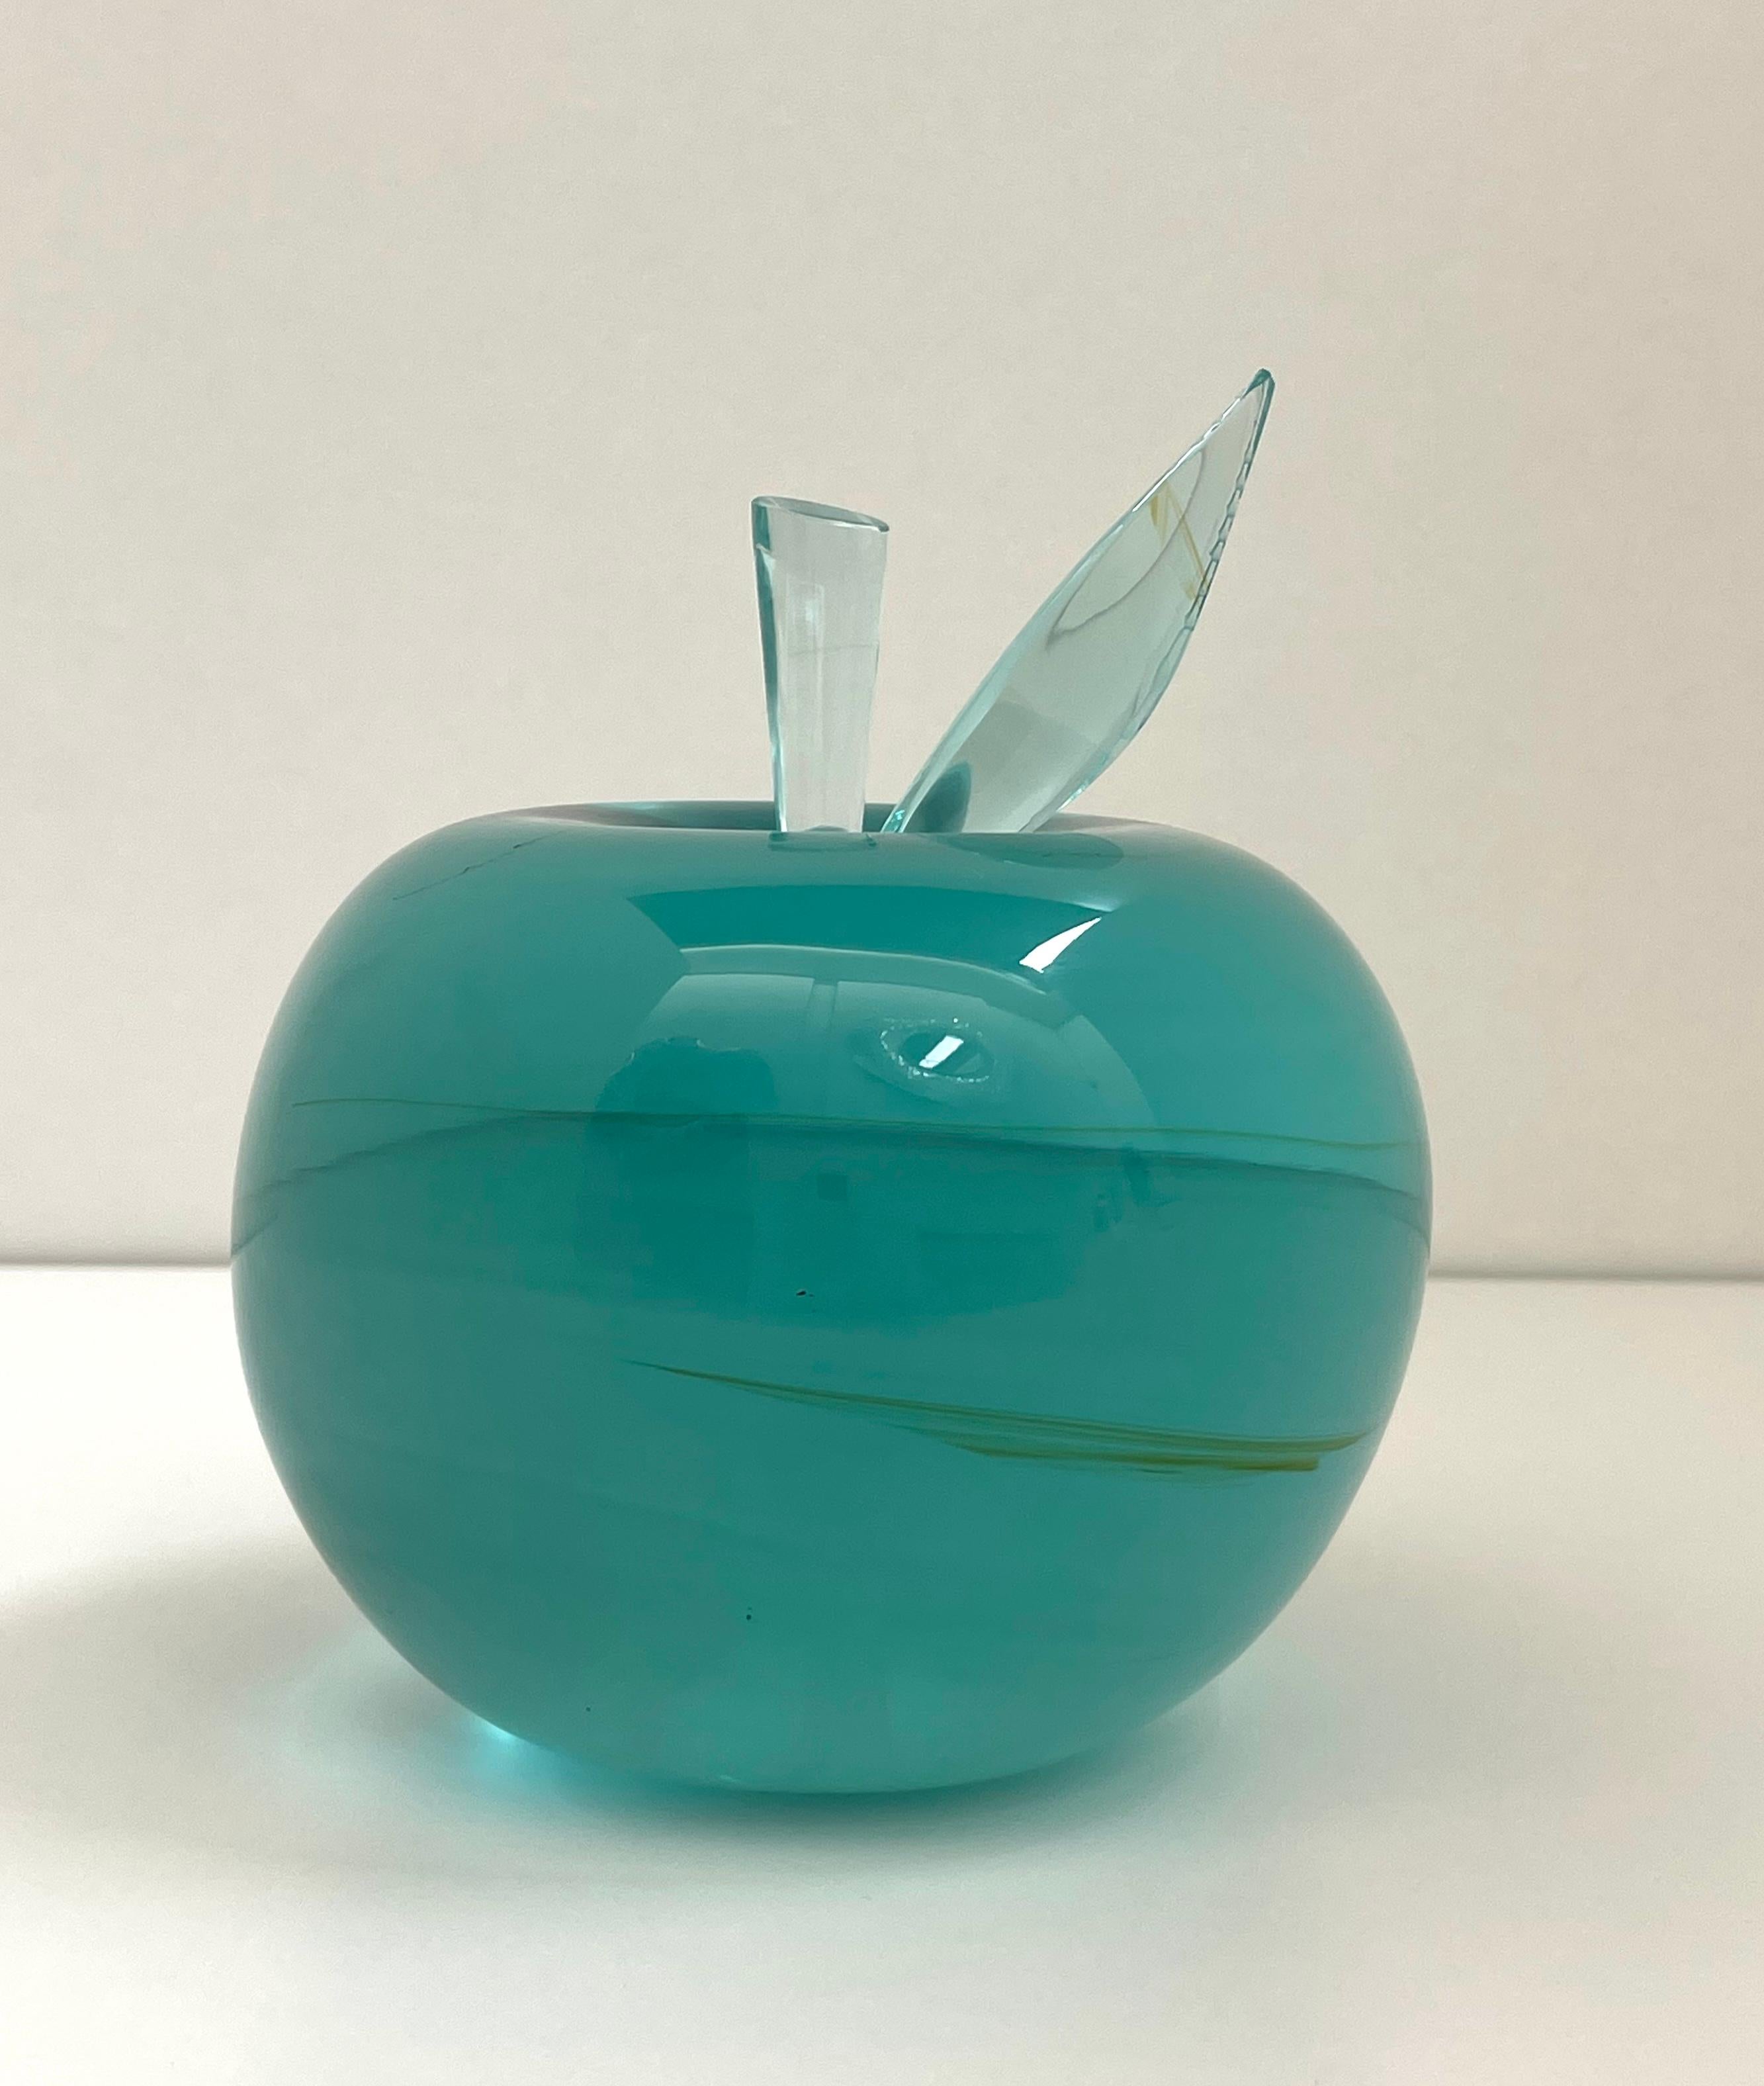 This apple was crafted from a whole natural raw block of aquamarine crystal.
This block was ground and polished for several hours by hand until it obtained the shape of an apple and a very smooth and shiny surface.
The transparency of the crystal